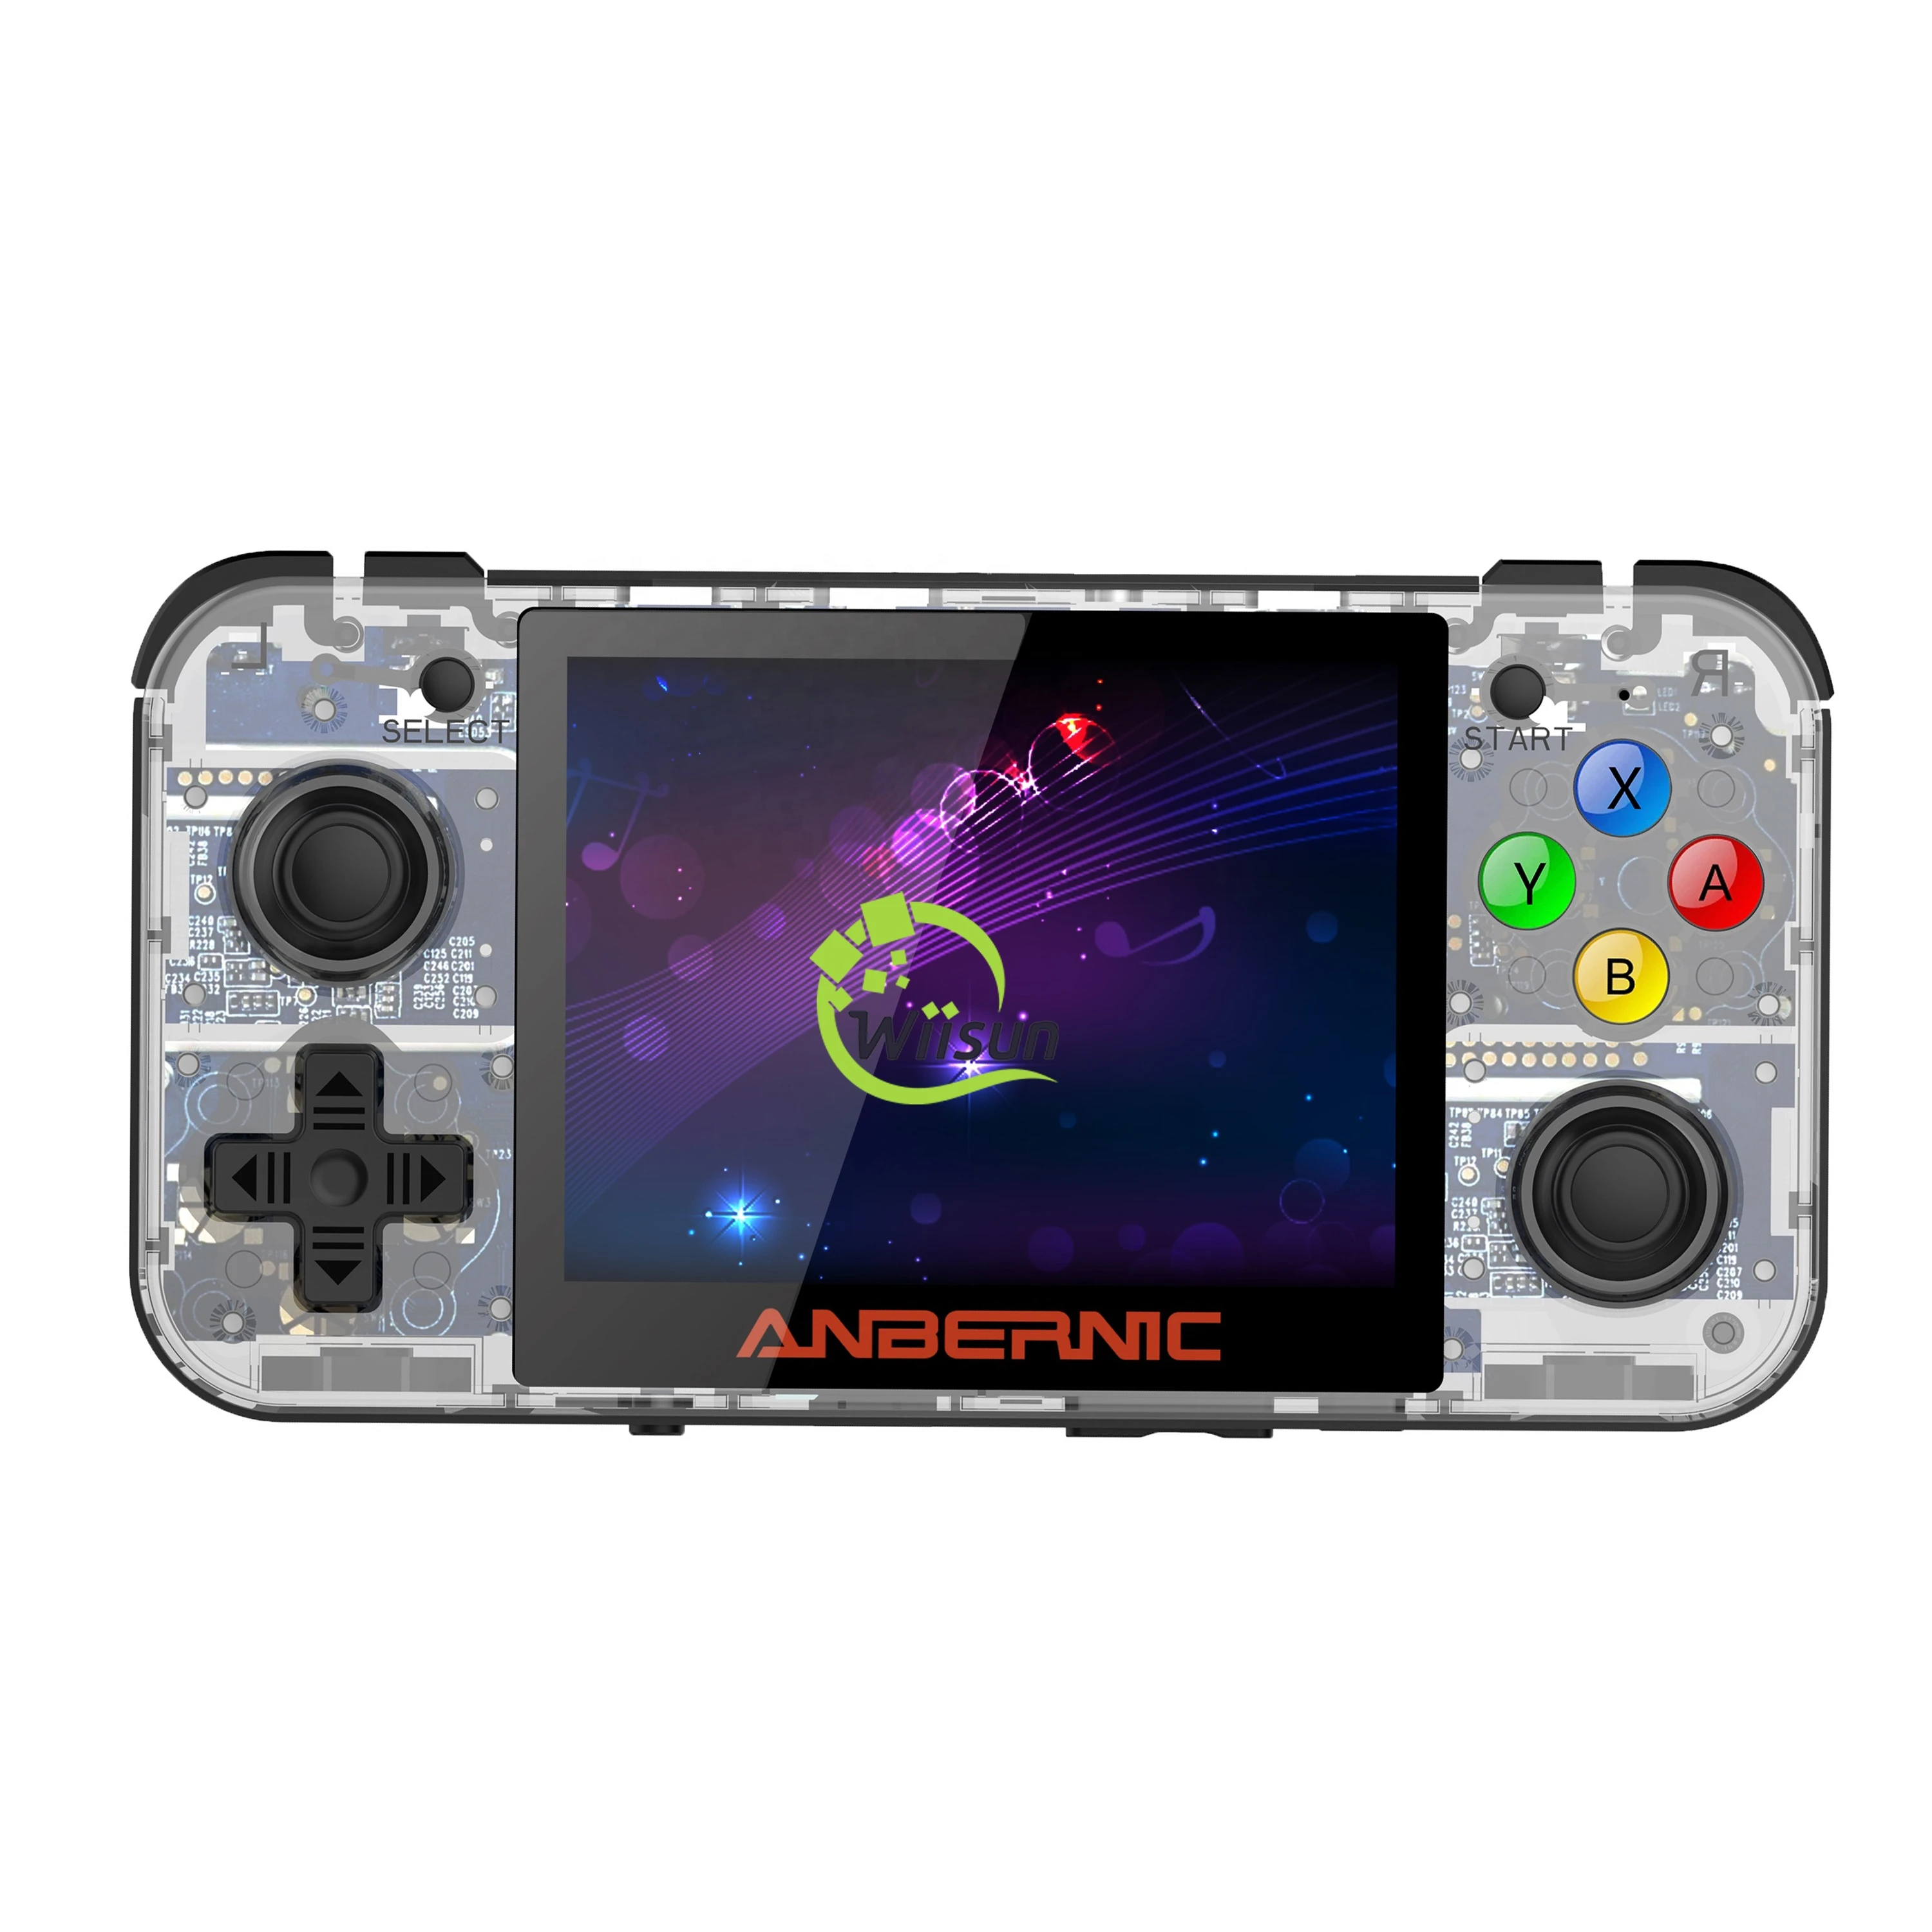 ANBERNIC RG350 RG350P Handheld Game Player HD Video Player 64Bit IPS Opendingux Pocket Portable Retro Game Console for Ps1